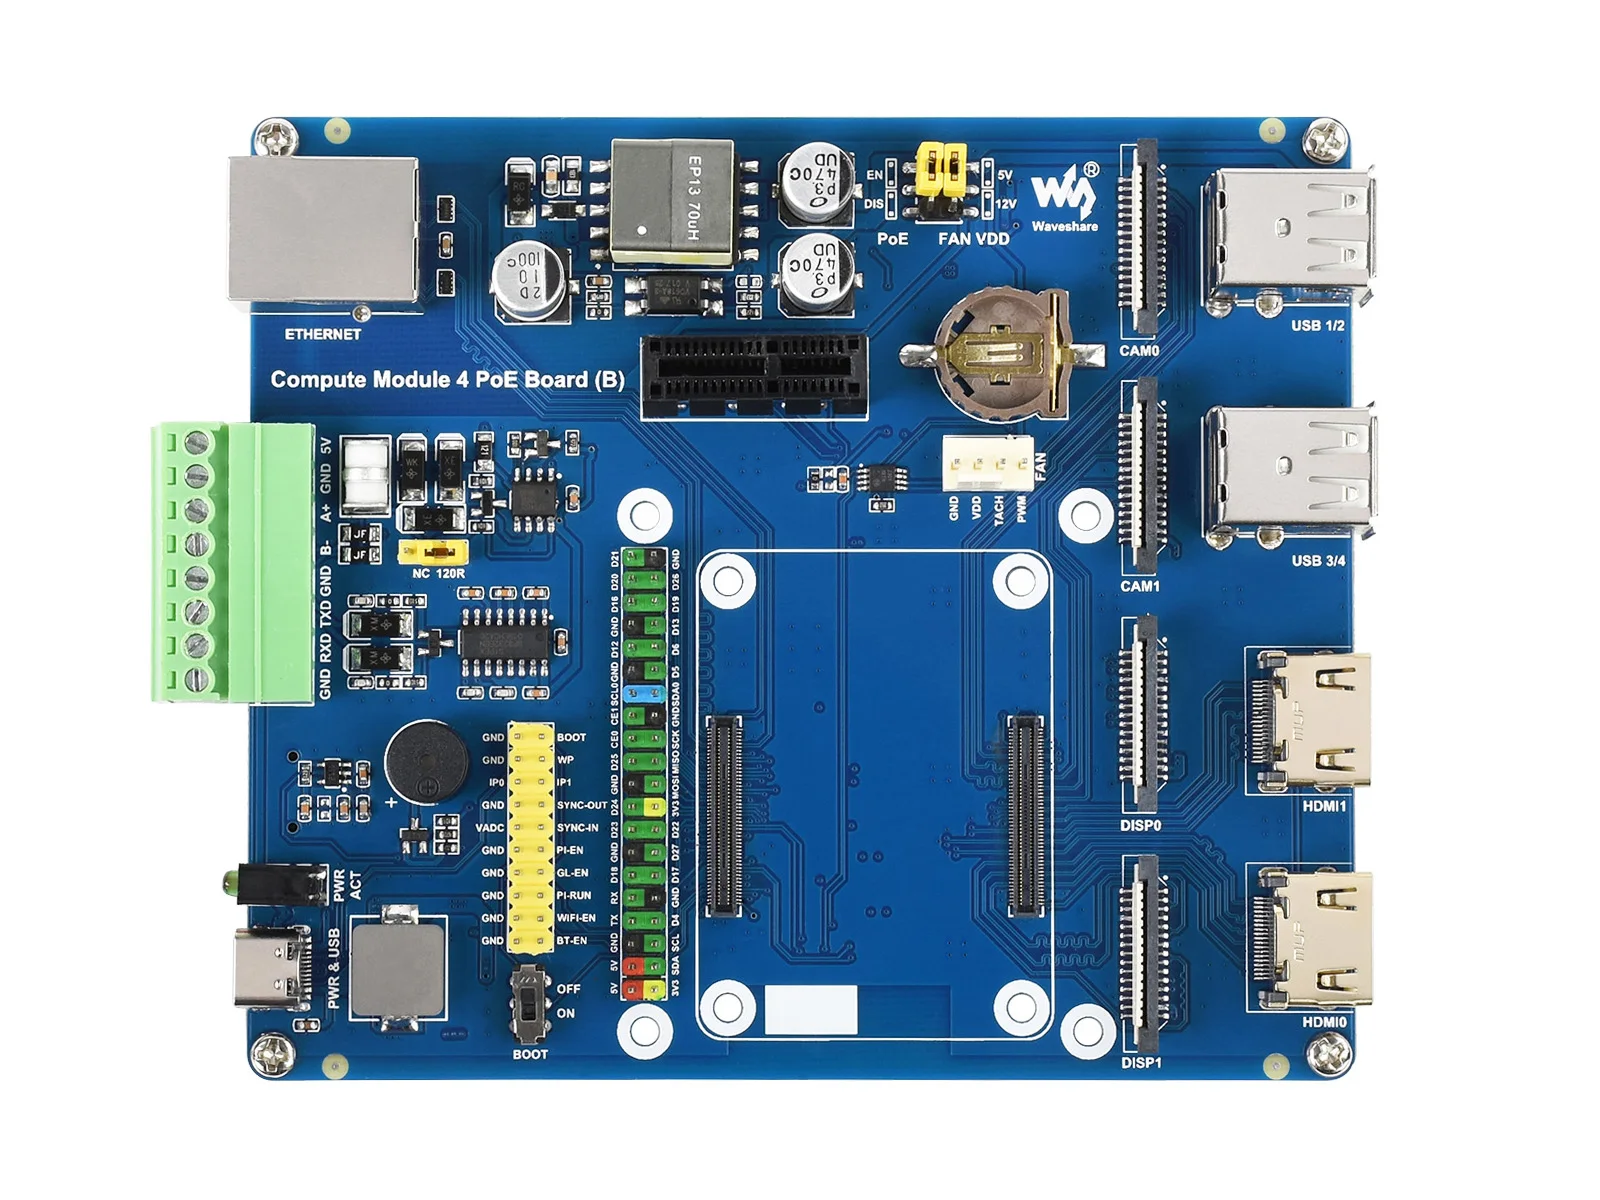 Raspberry Pi Compute Module 4 IO Board With PoE Feature(Type B),For all Compute Module 4 Variants,Compute Module 4 PoE Board (B)